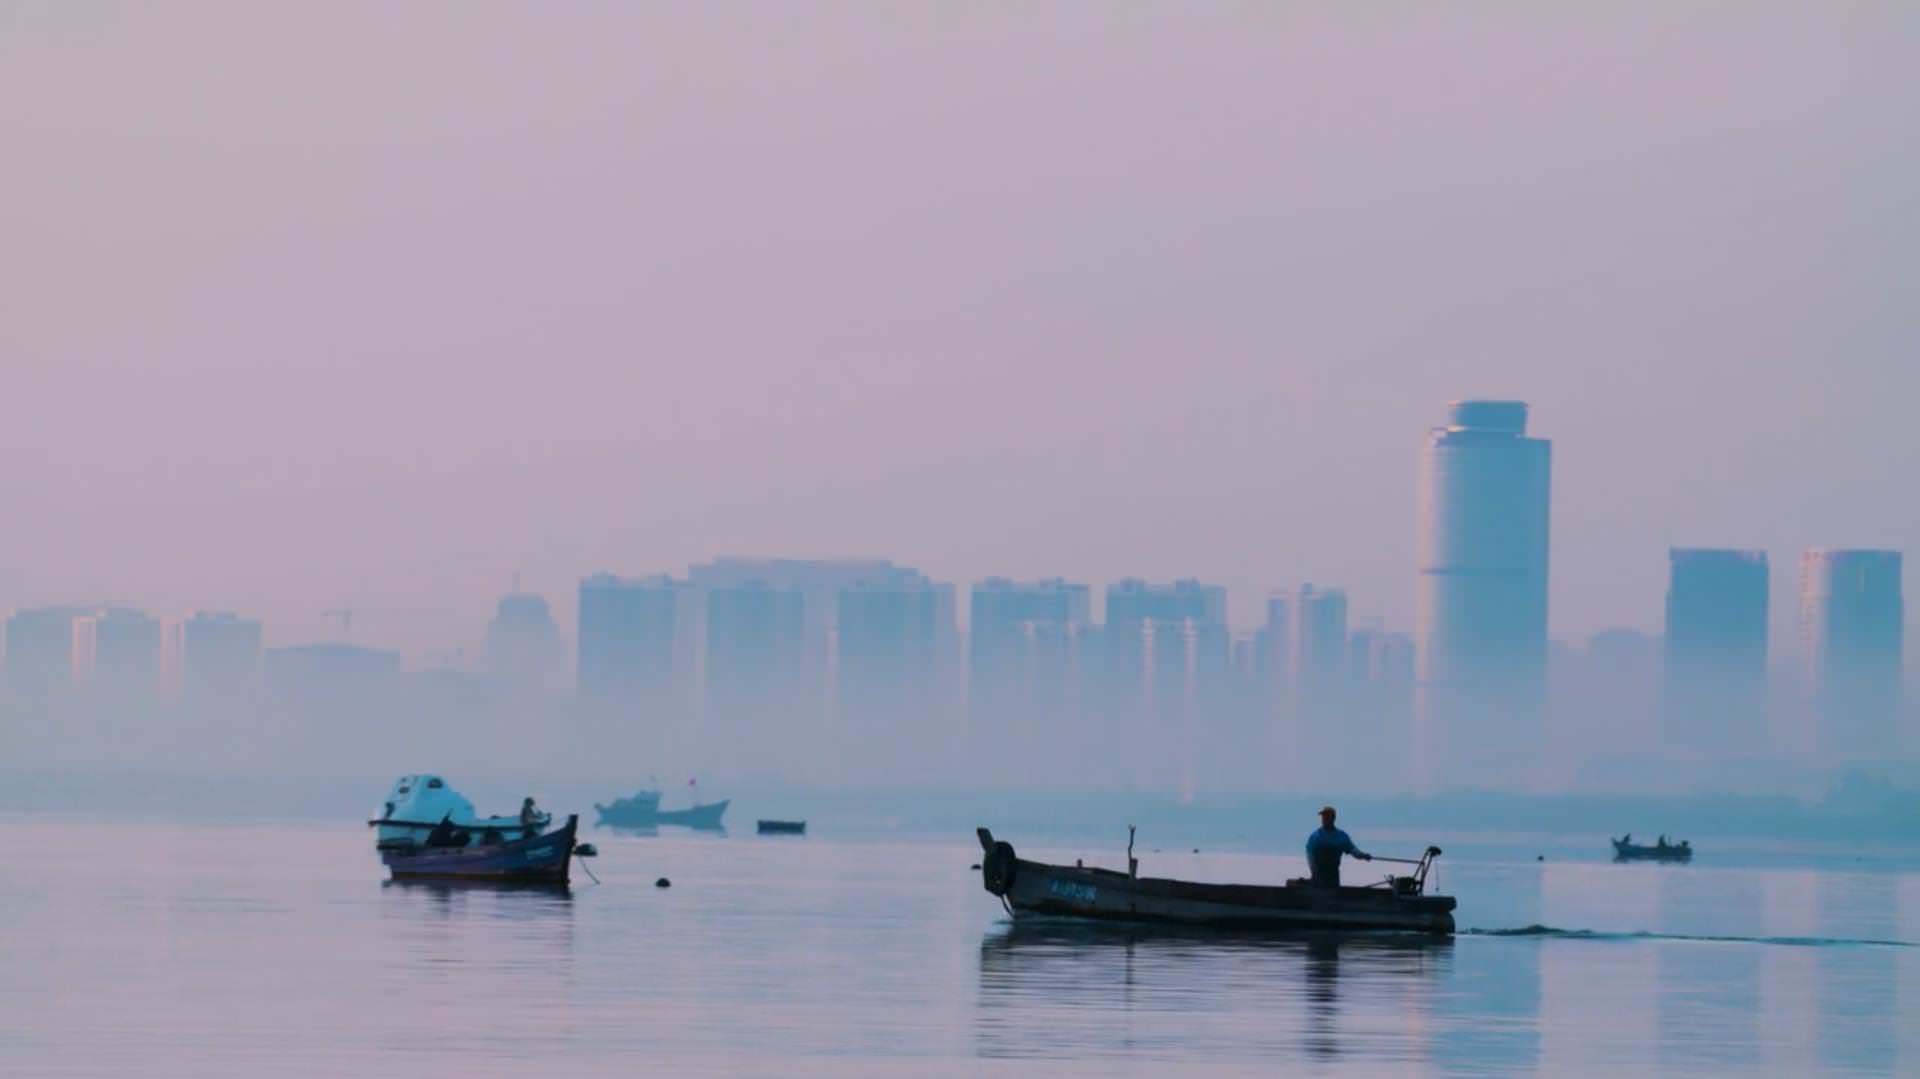 Cinematic image of a small boat in the port of Yantai with the skyline in the background